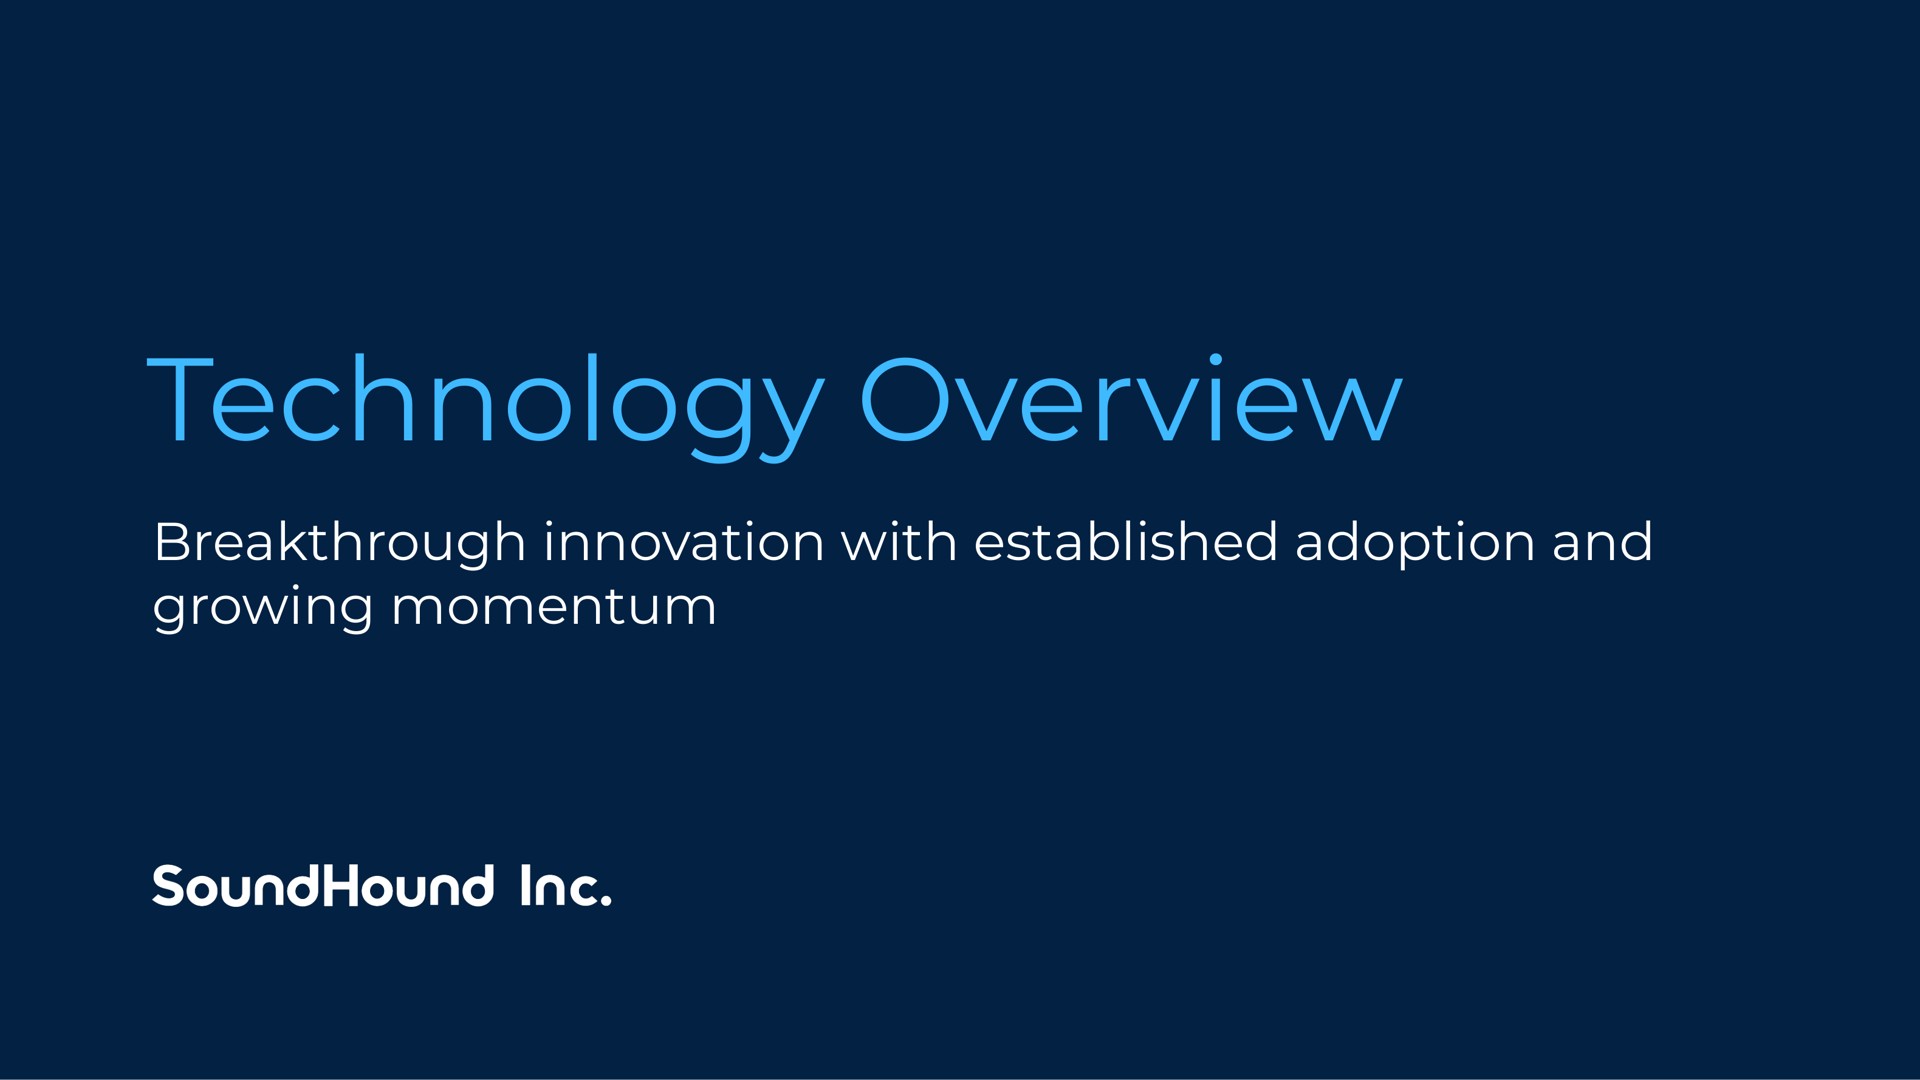 technology overview breakthrough innovation with established adoption and growing momentum | SoundHound